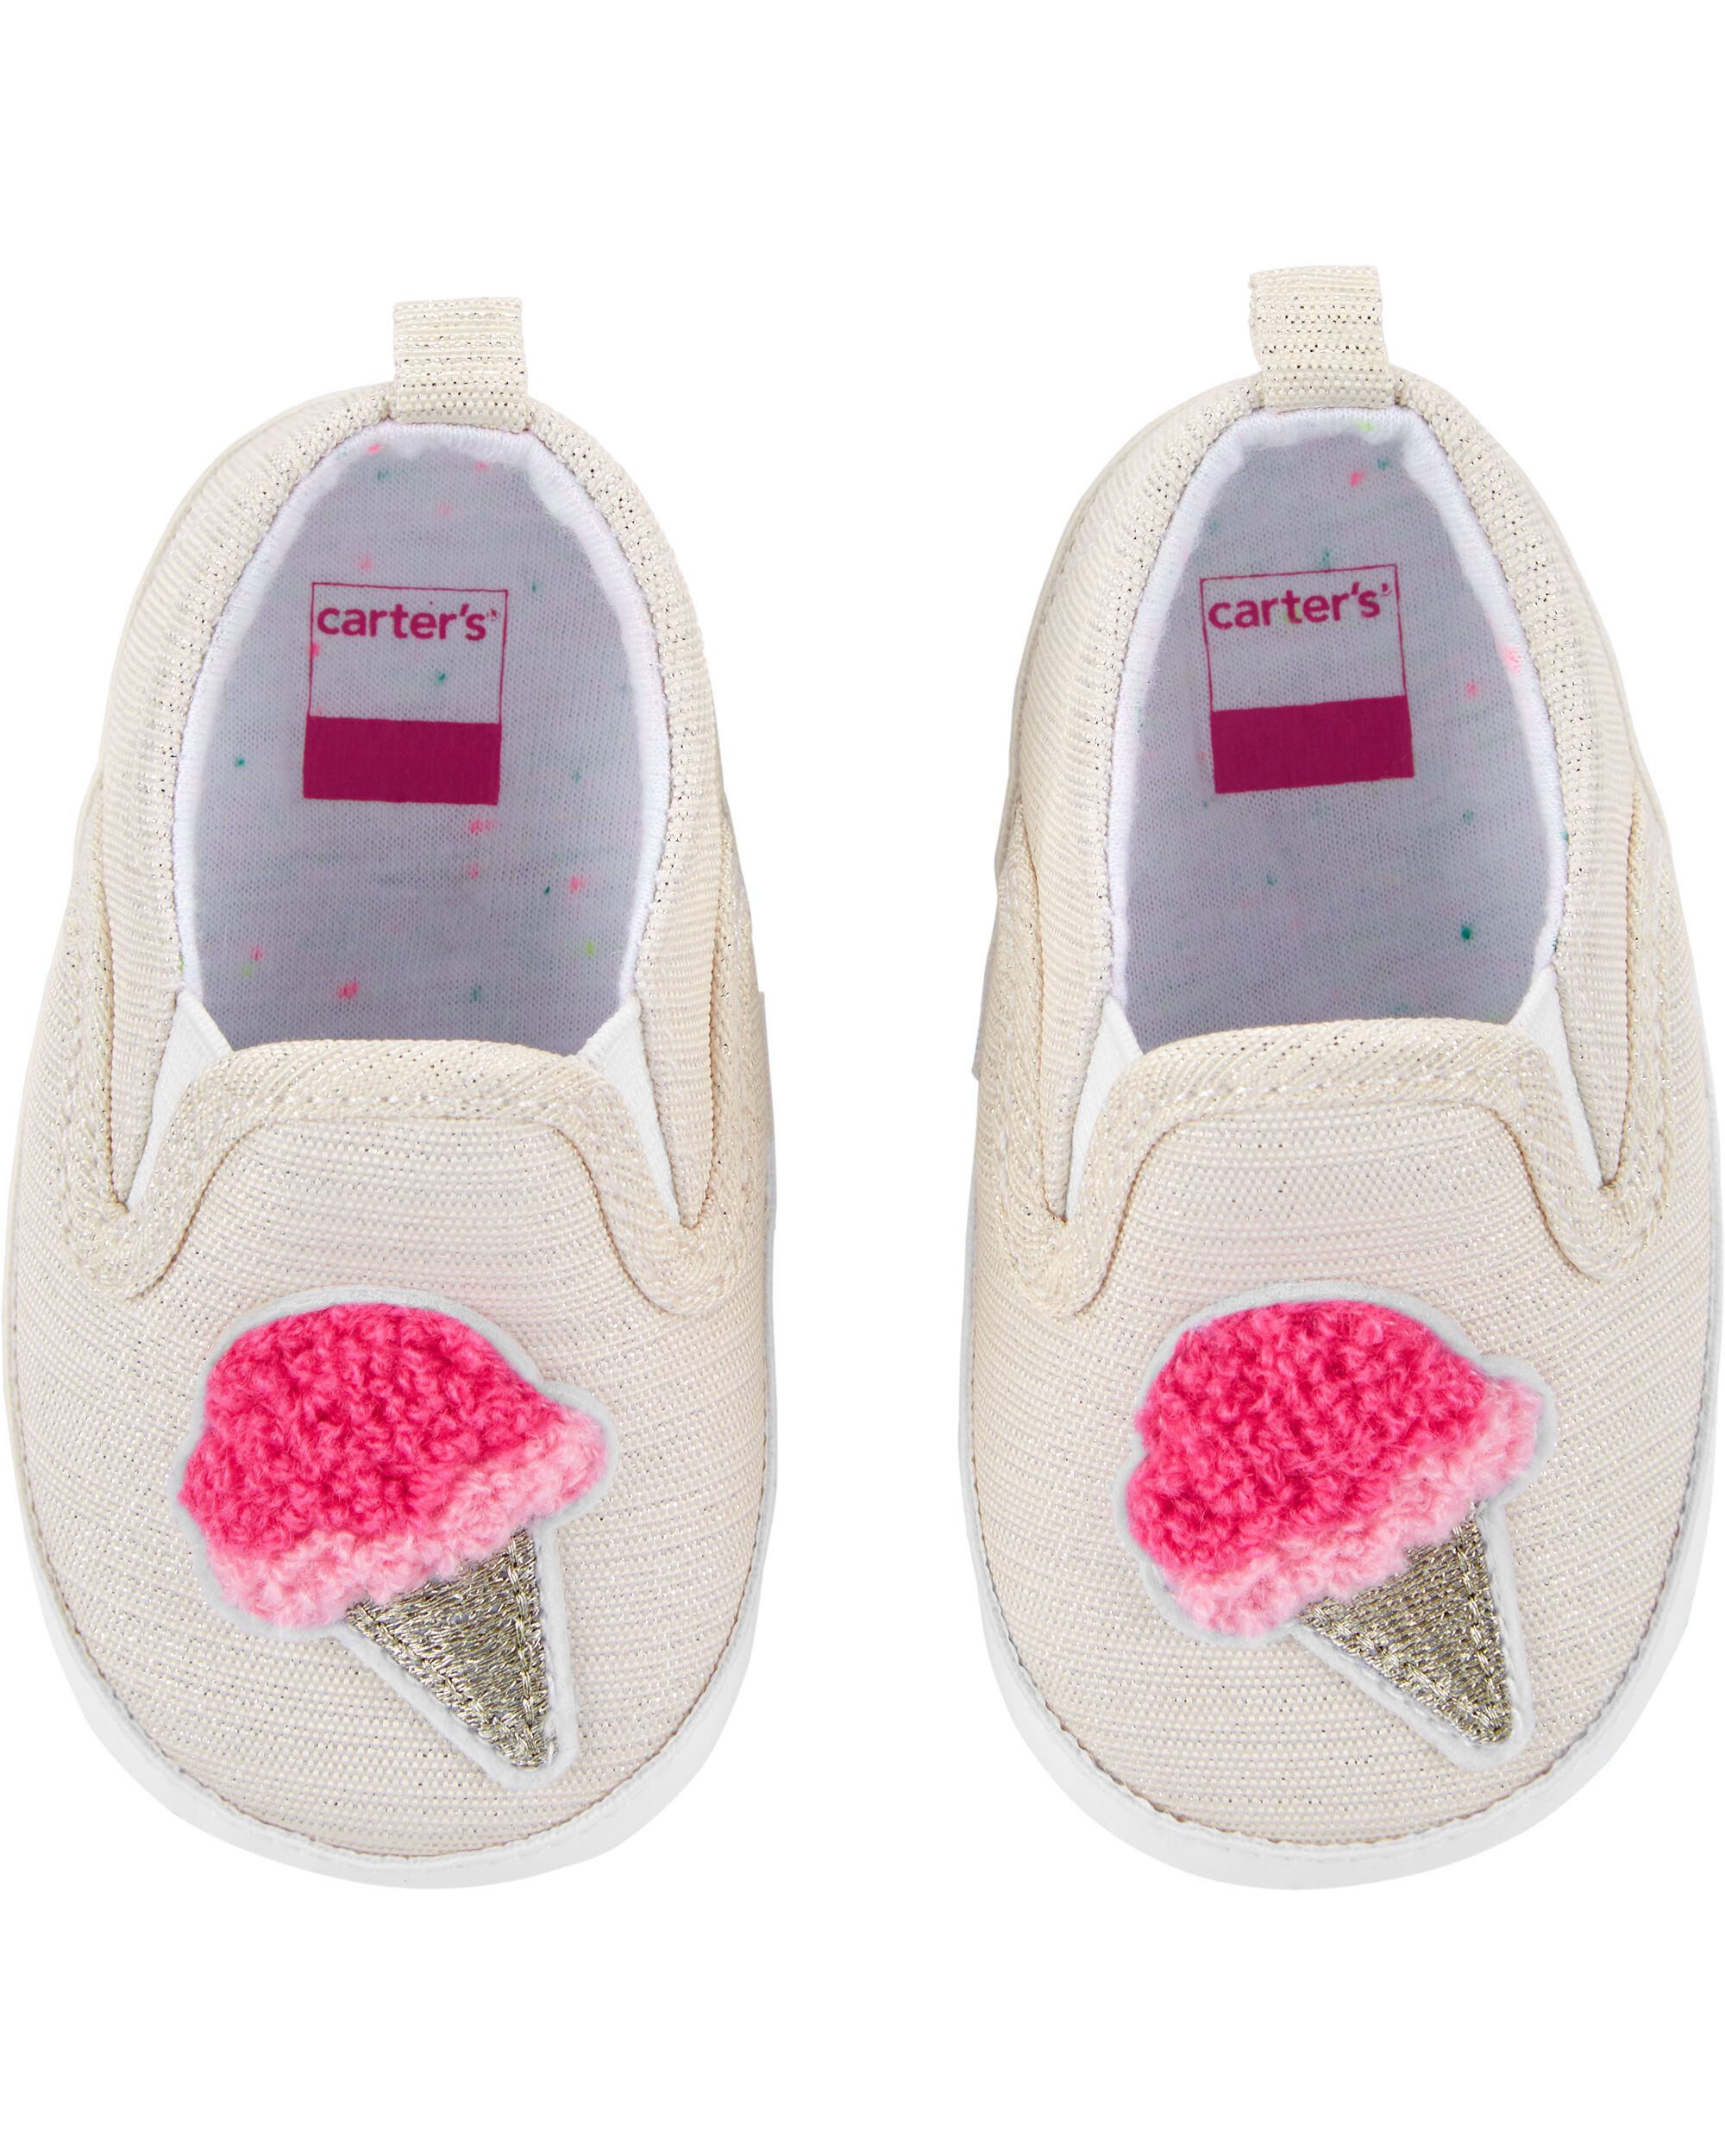 carters baby walking shoes